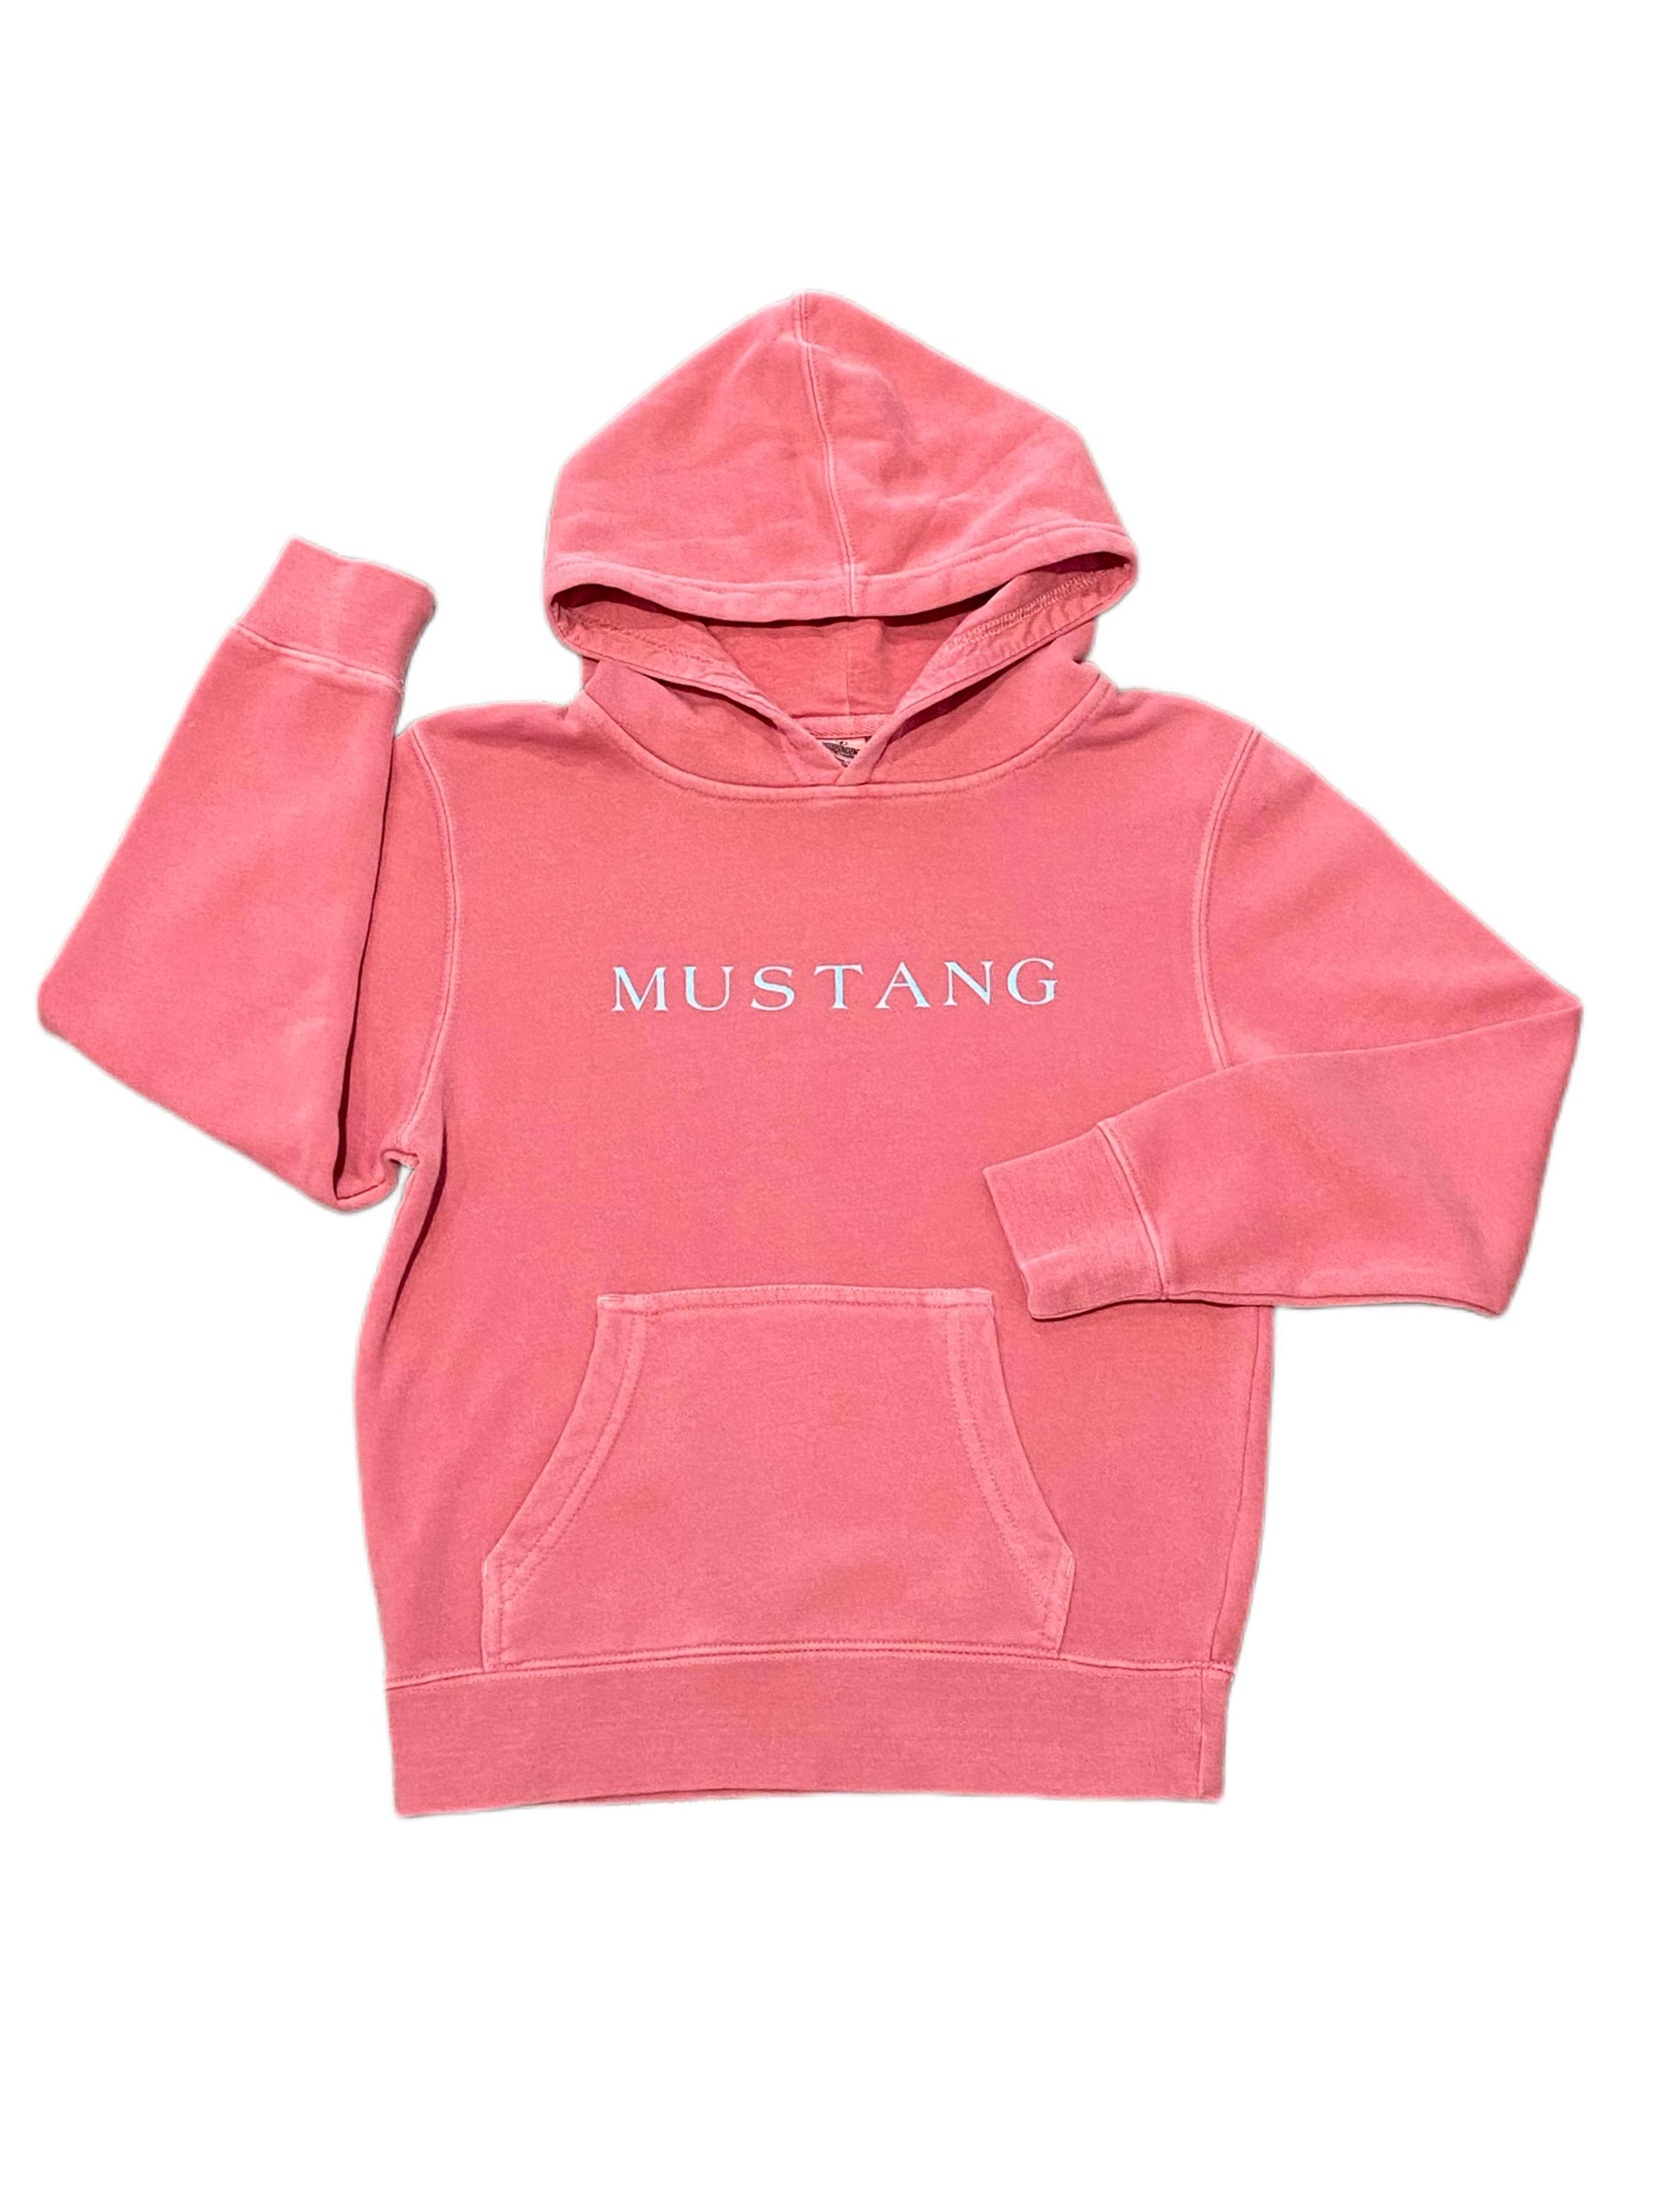 ‘Stang by the Sea Hoodie